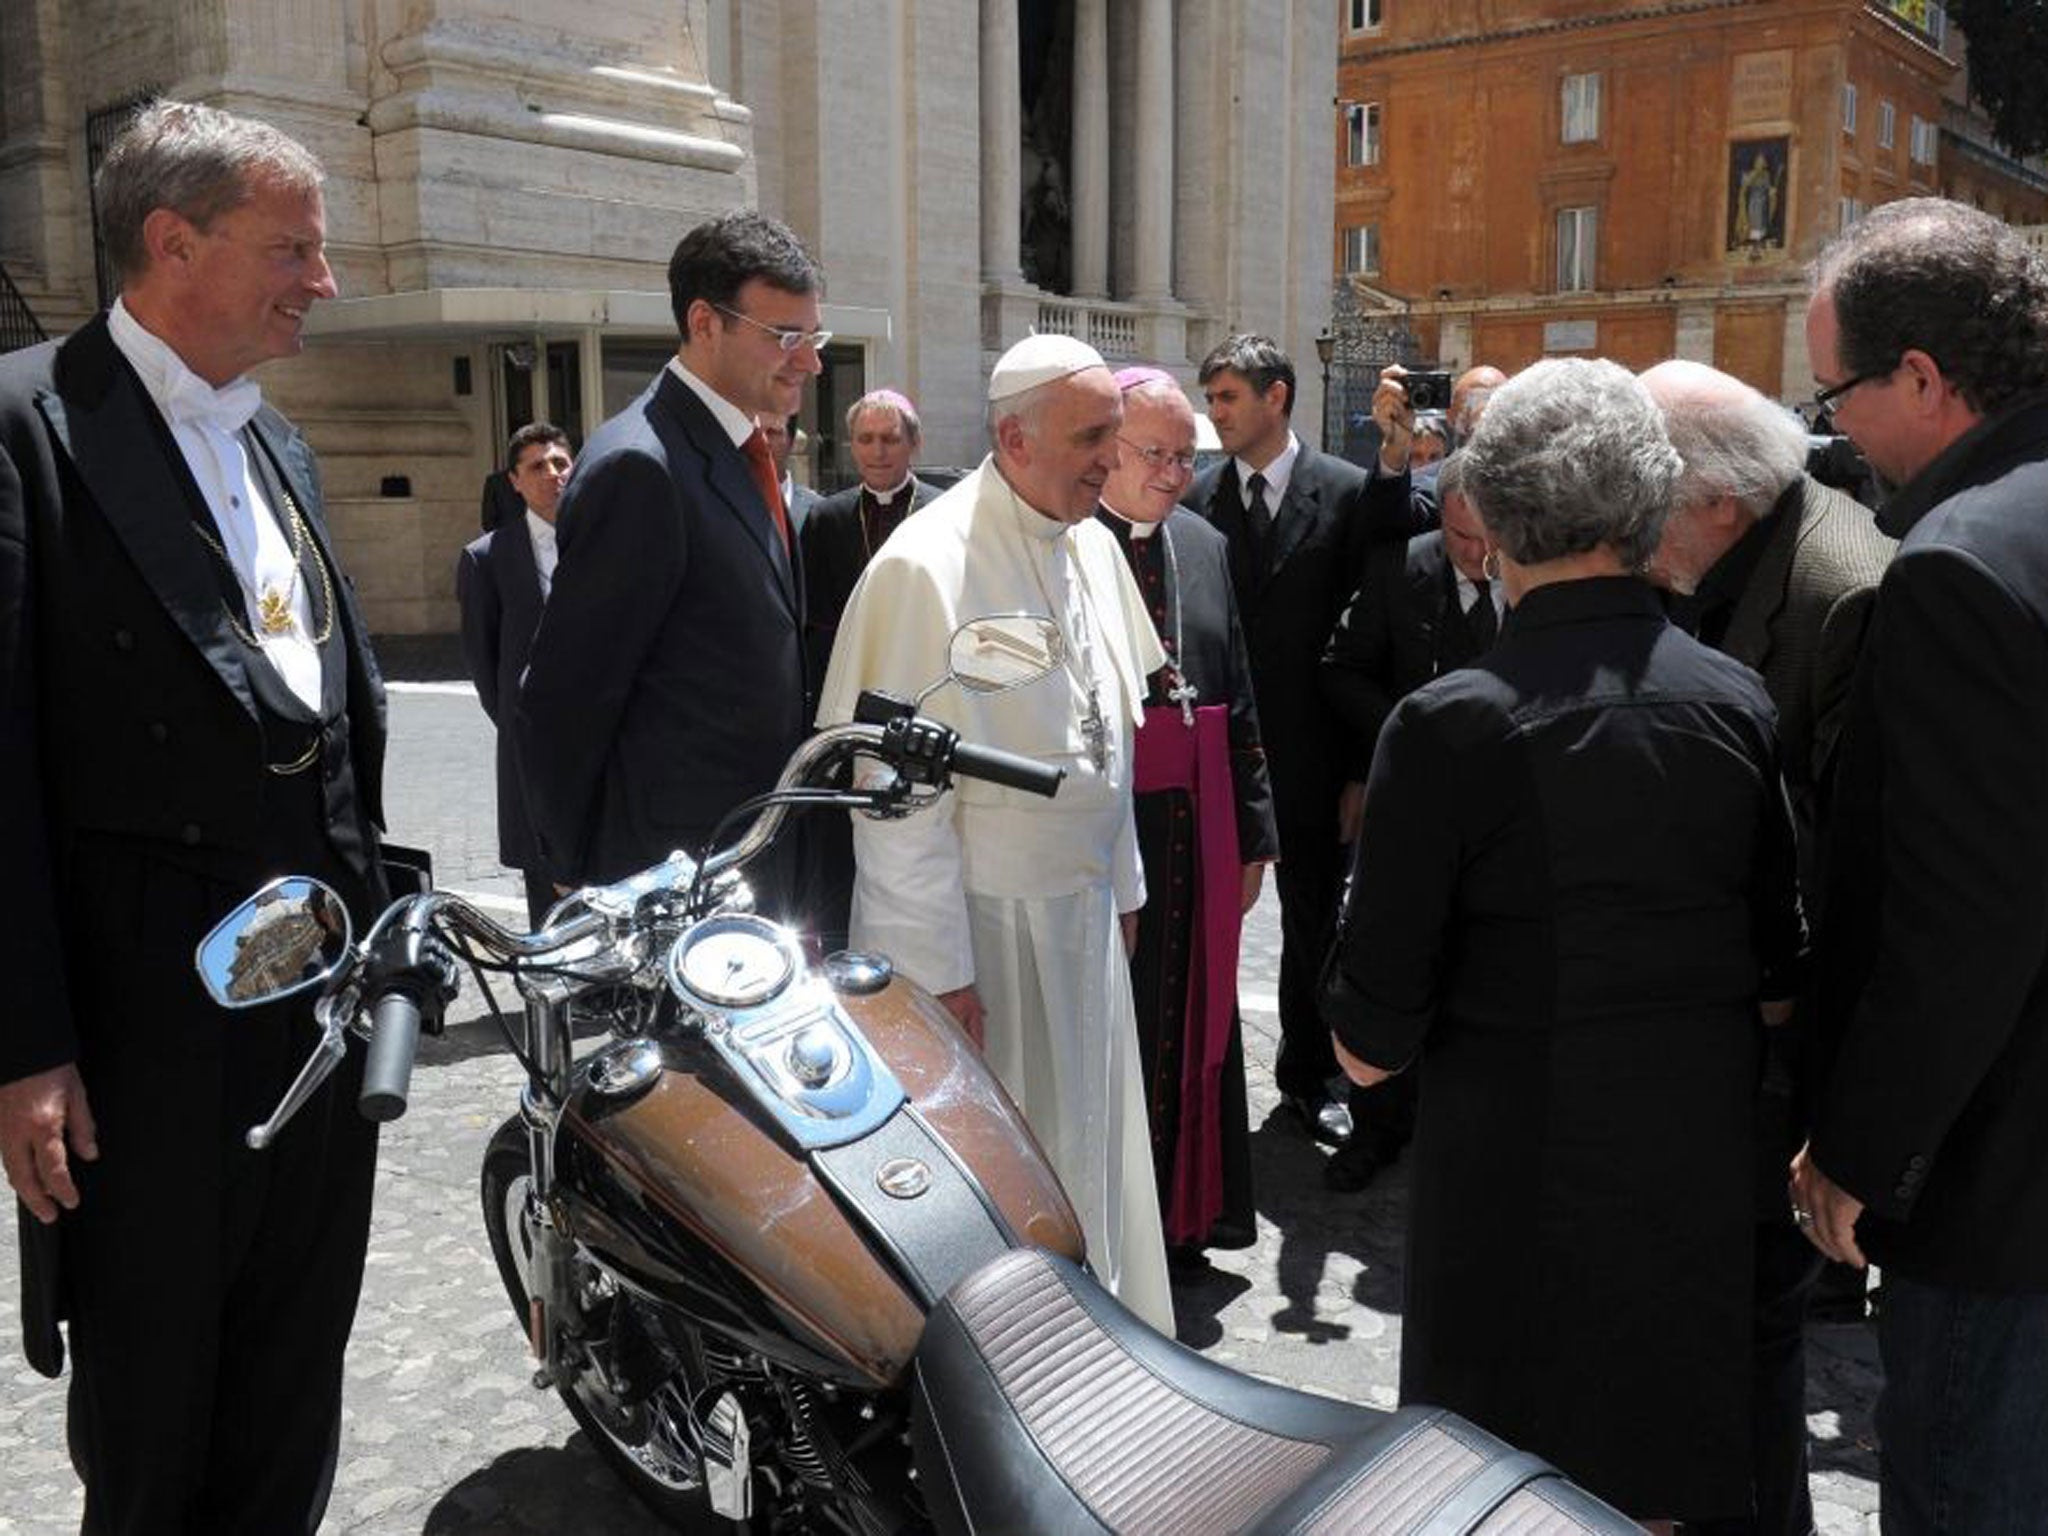 Pope Francis being presented with a Harley Davidson Dyna Super Glide motorcycle in Vatican